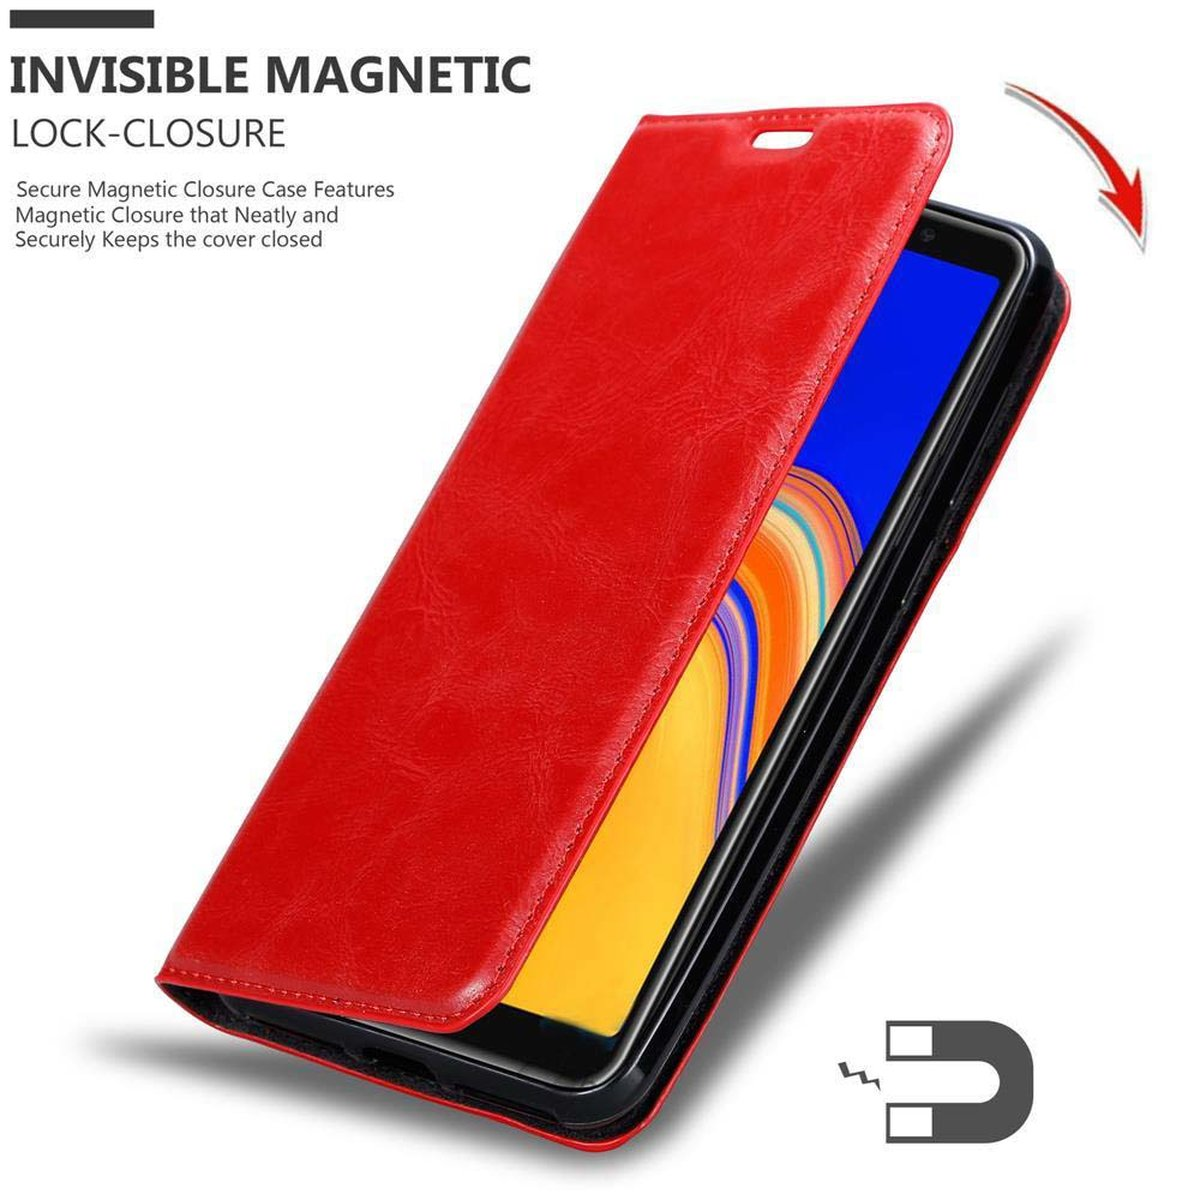 Bookcover, APFEL Magnet, ROT Book CADORABO Hülle Invisible Galaxy Samsung, A6s,